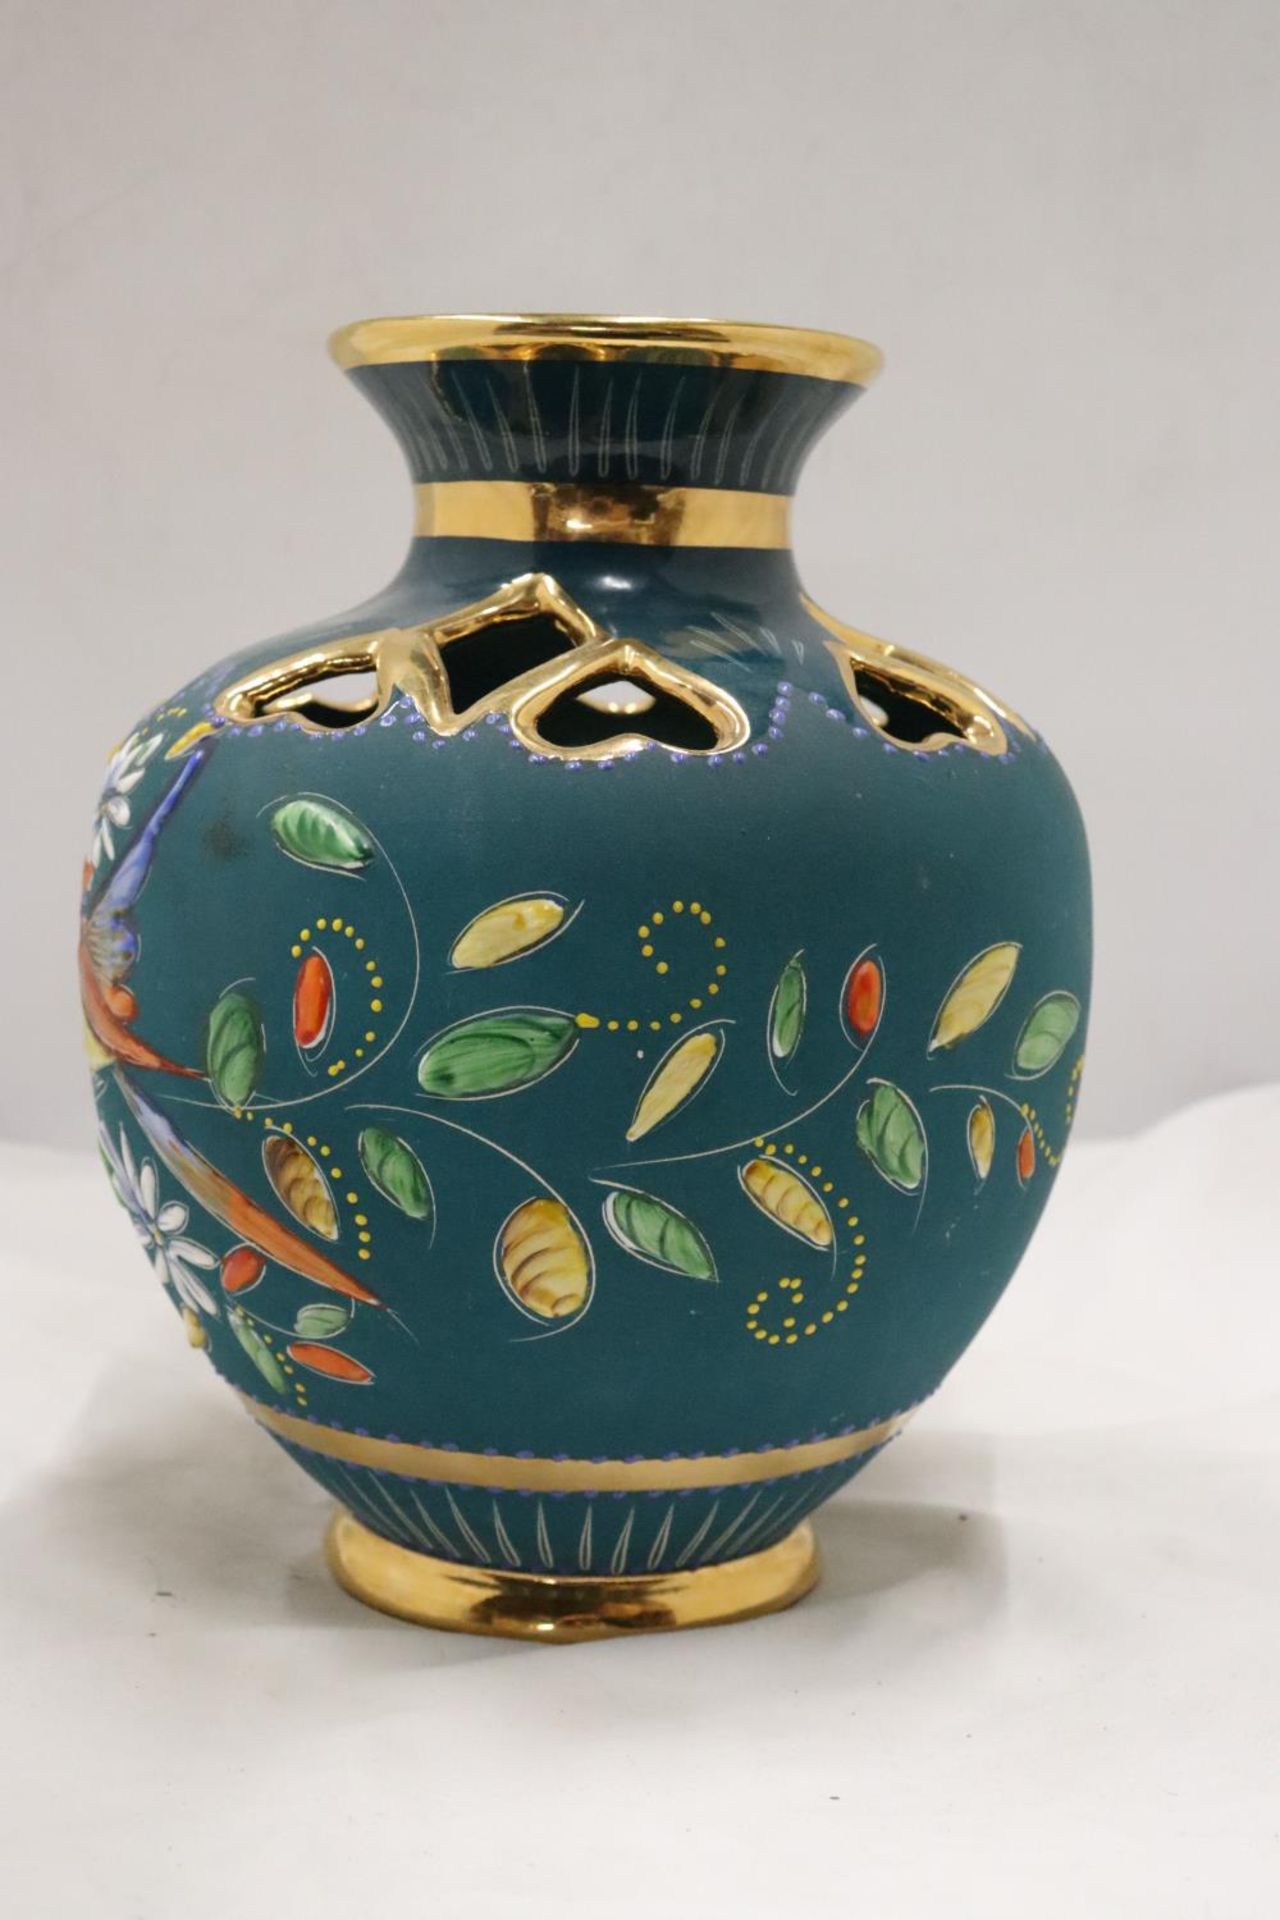 A CONTINENTAL TEAL BLUE VASE WITH THE MARK HB, QUAREGNON, BELGIUM TO THE BASE - Image 5 of 6